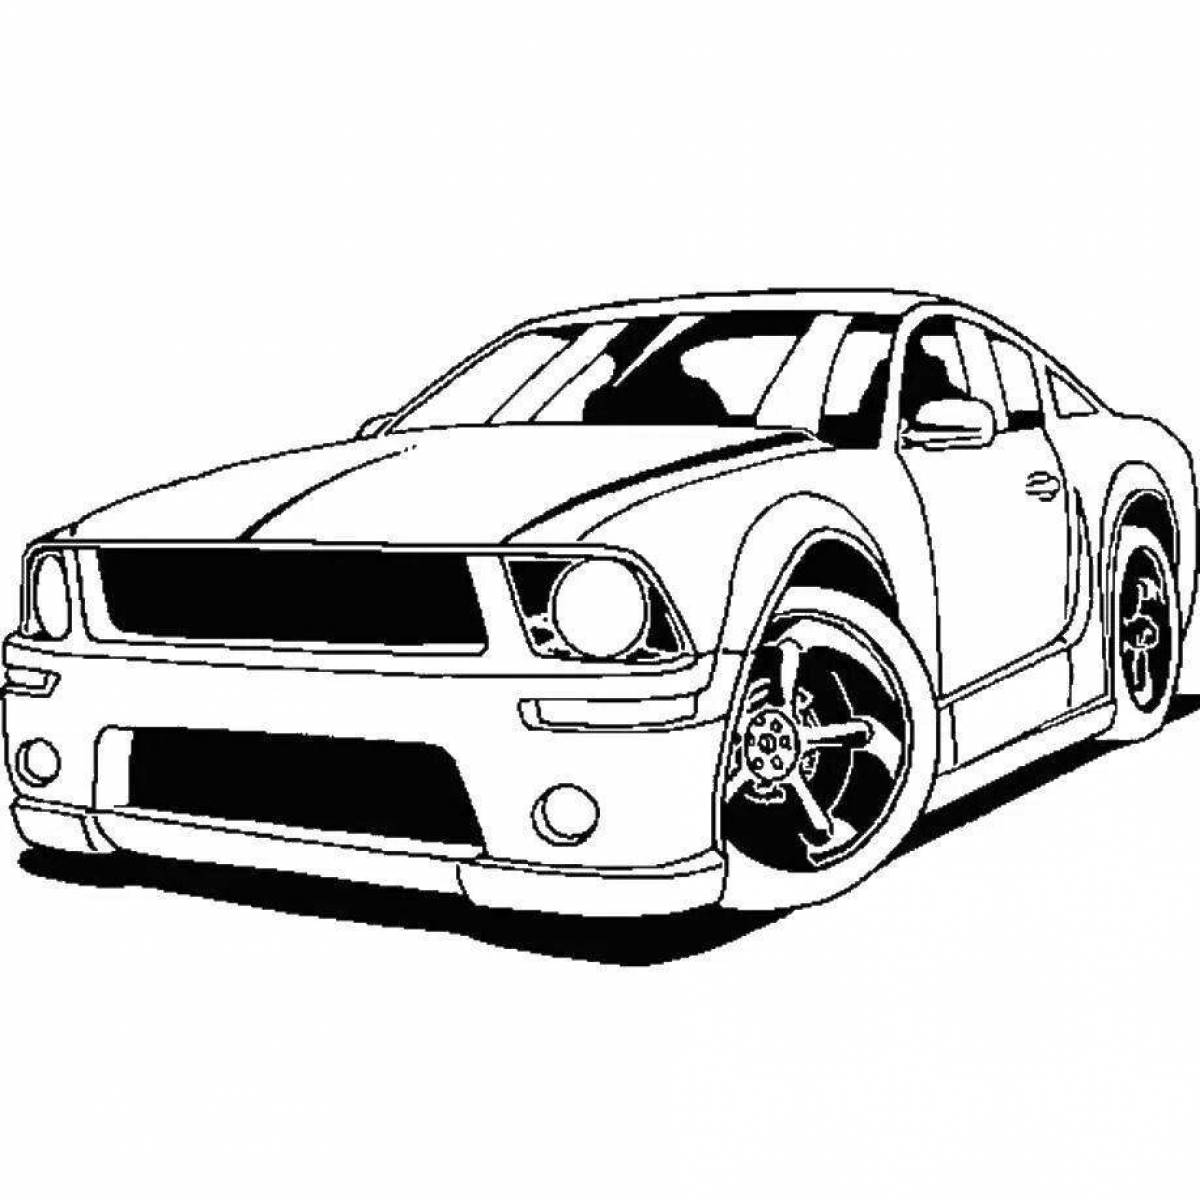 Attractive mustang coloring book for boys